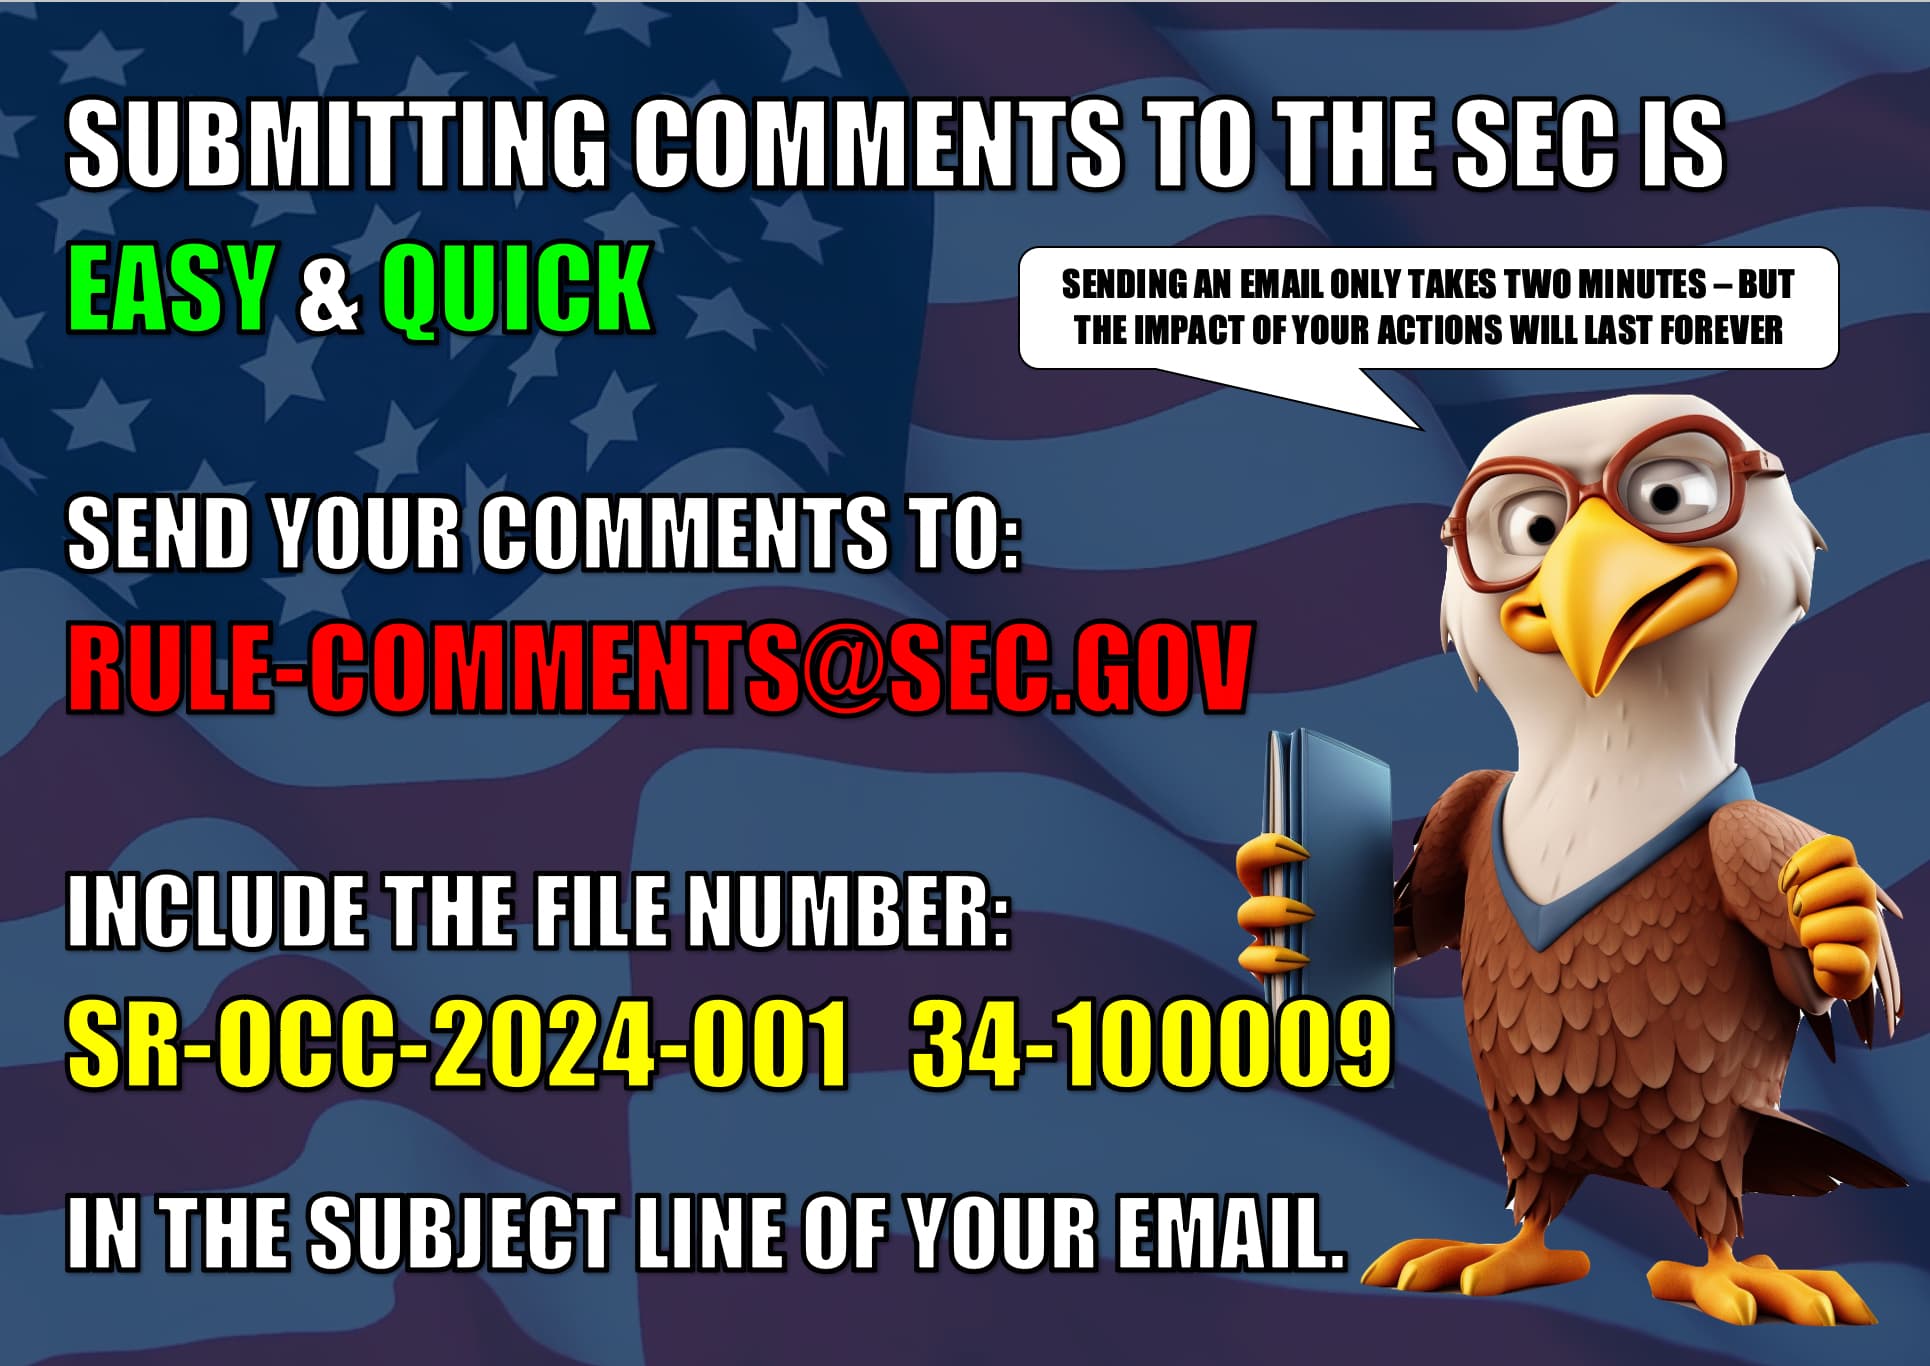 HOW TO SUBMIT COMMENT IS EASY AND QUICK